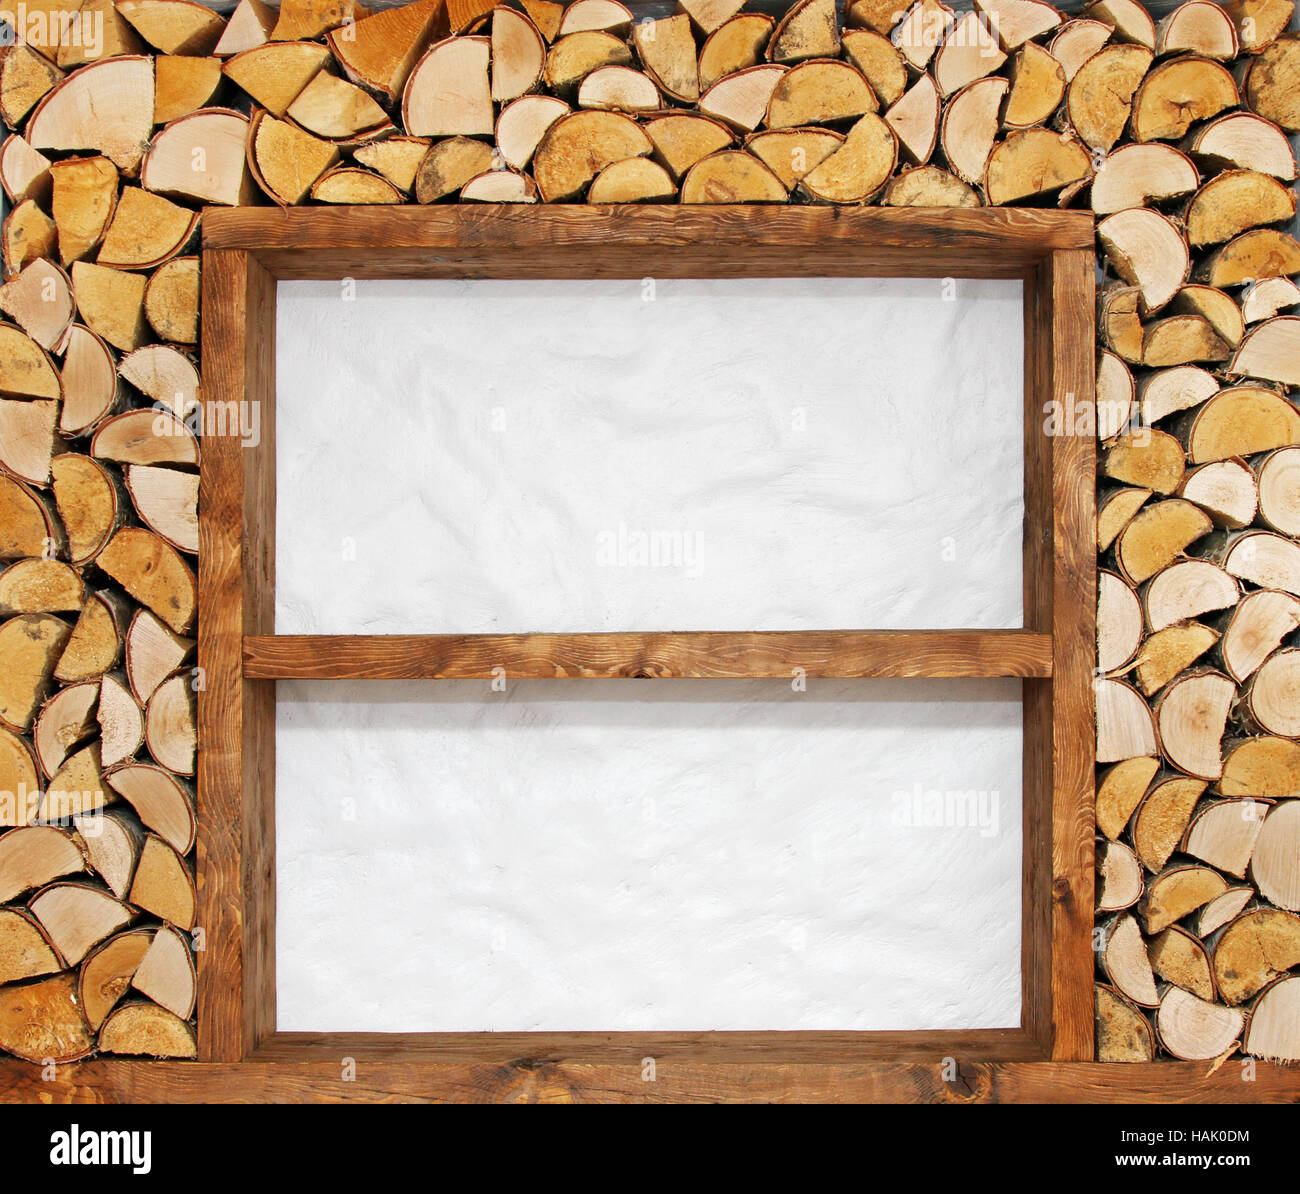 empty wooden shelves with firewood decoration Stock Photo